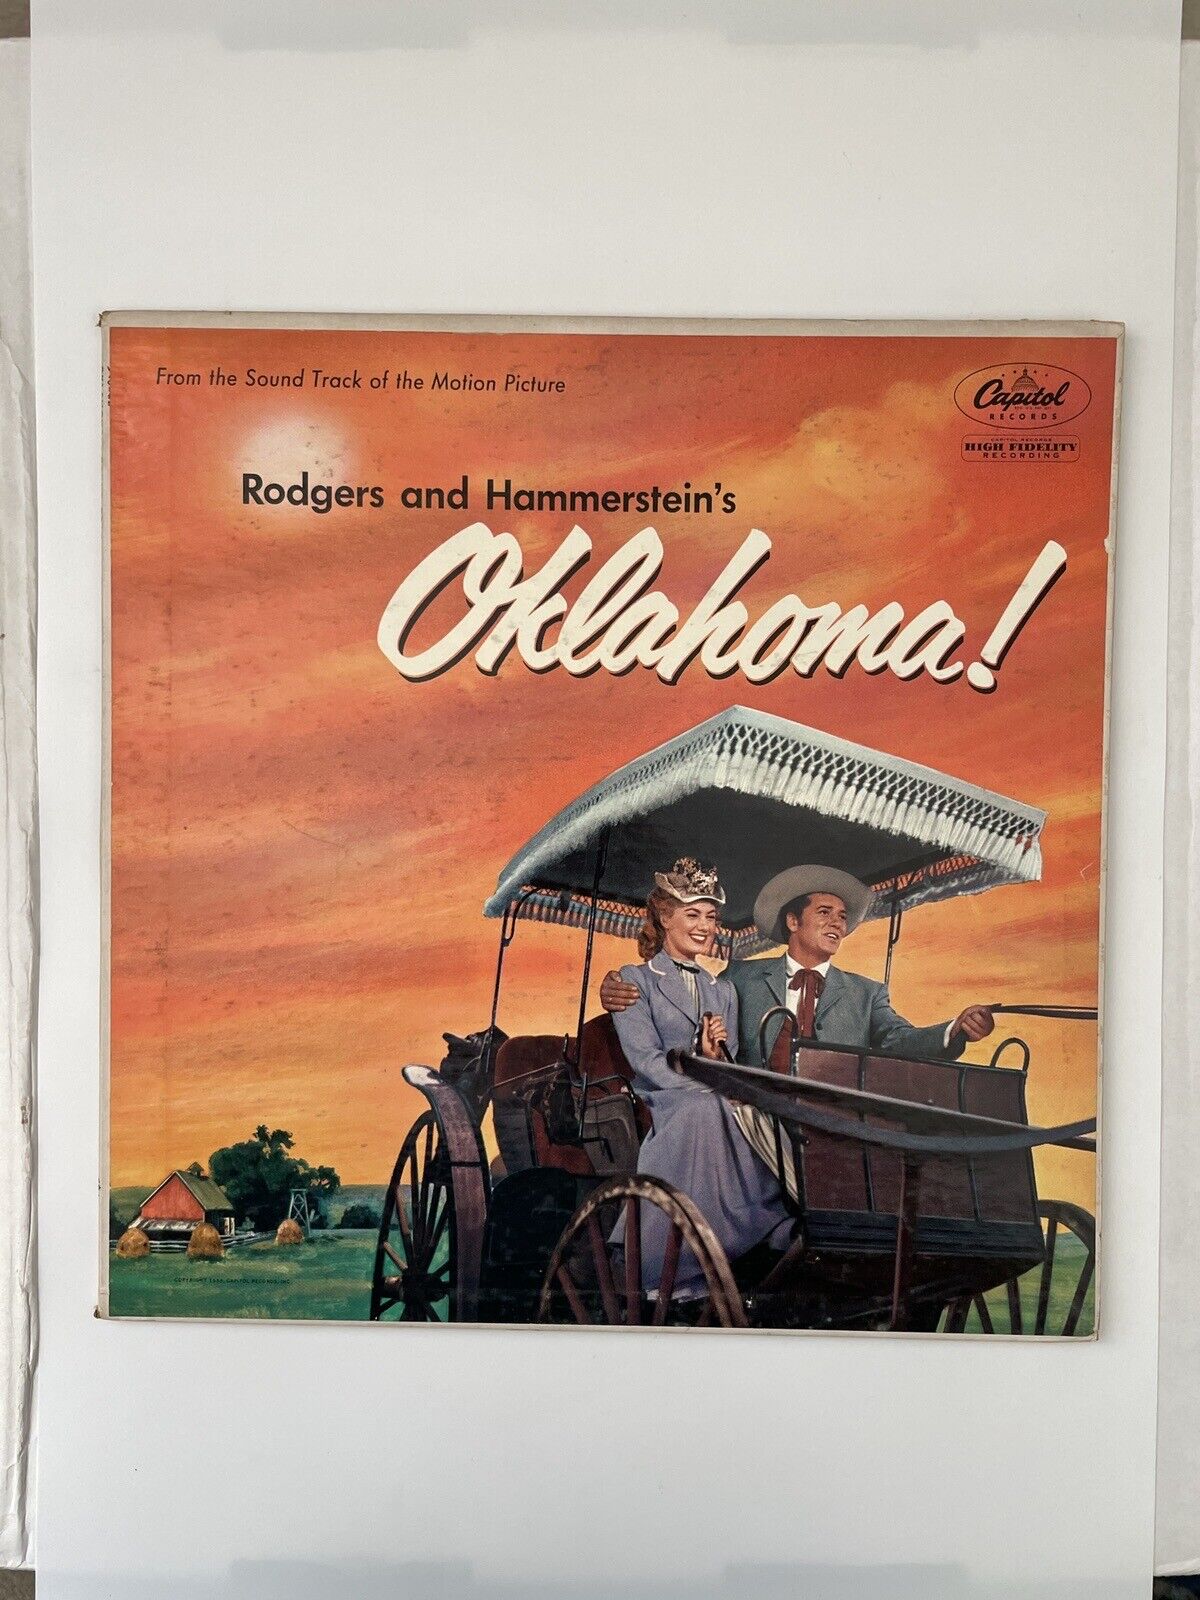 Vintage 1955 Oklahoma Soundtrack Rogers Hammerstein Record LP Capitol Records N